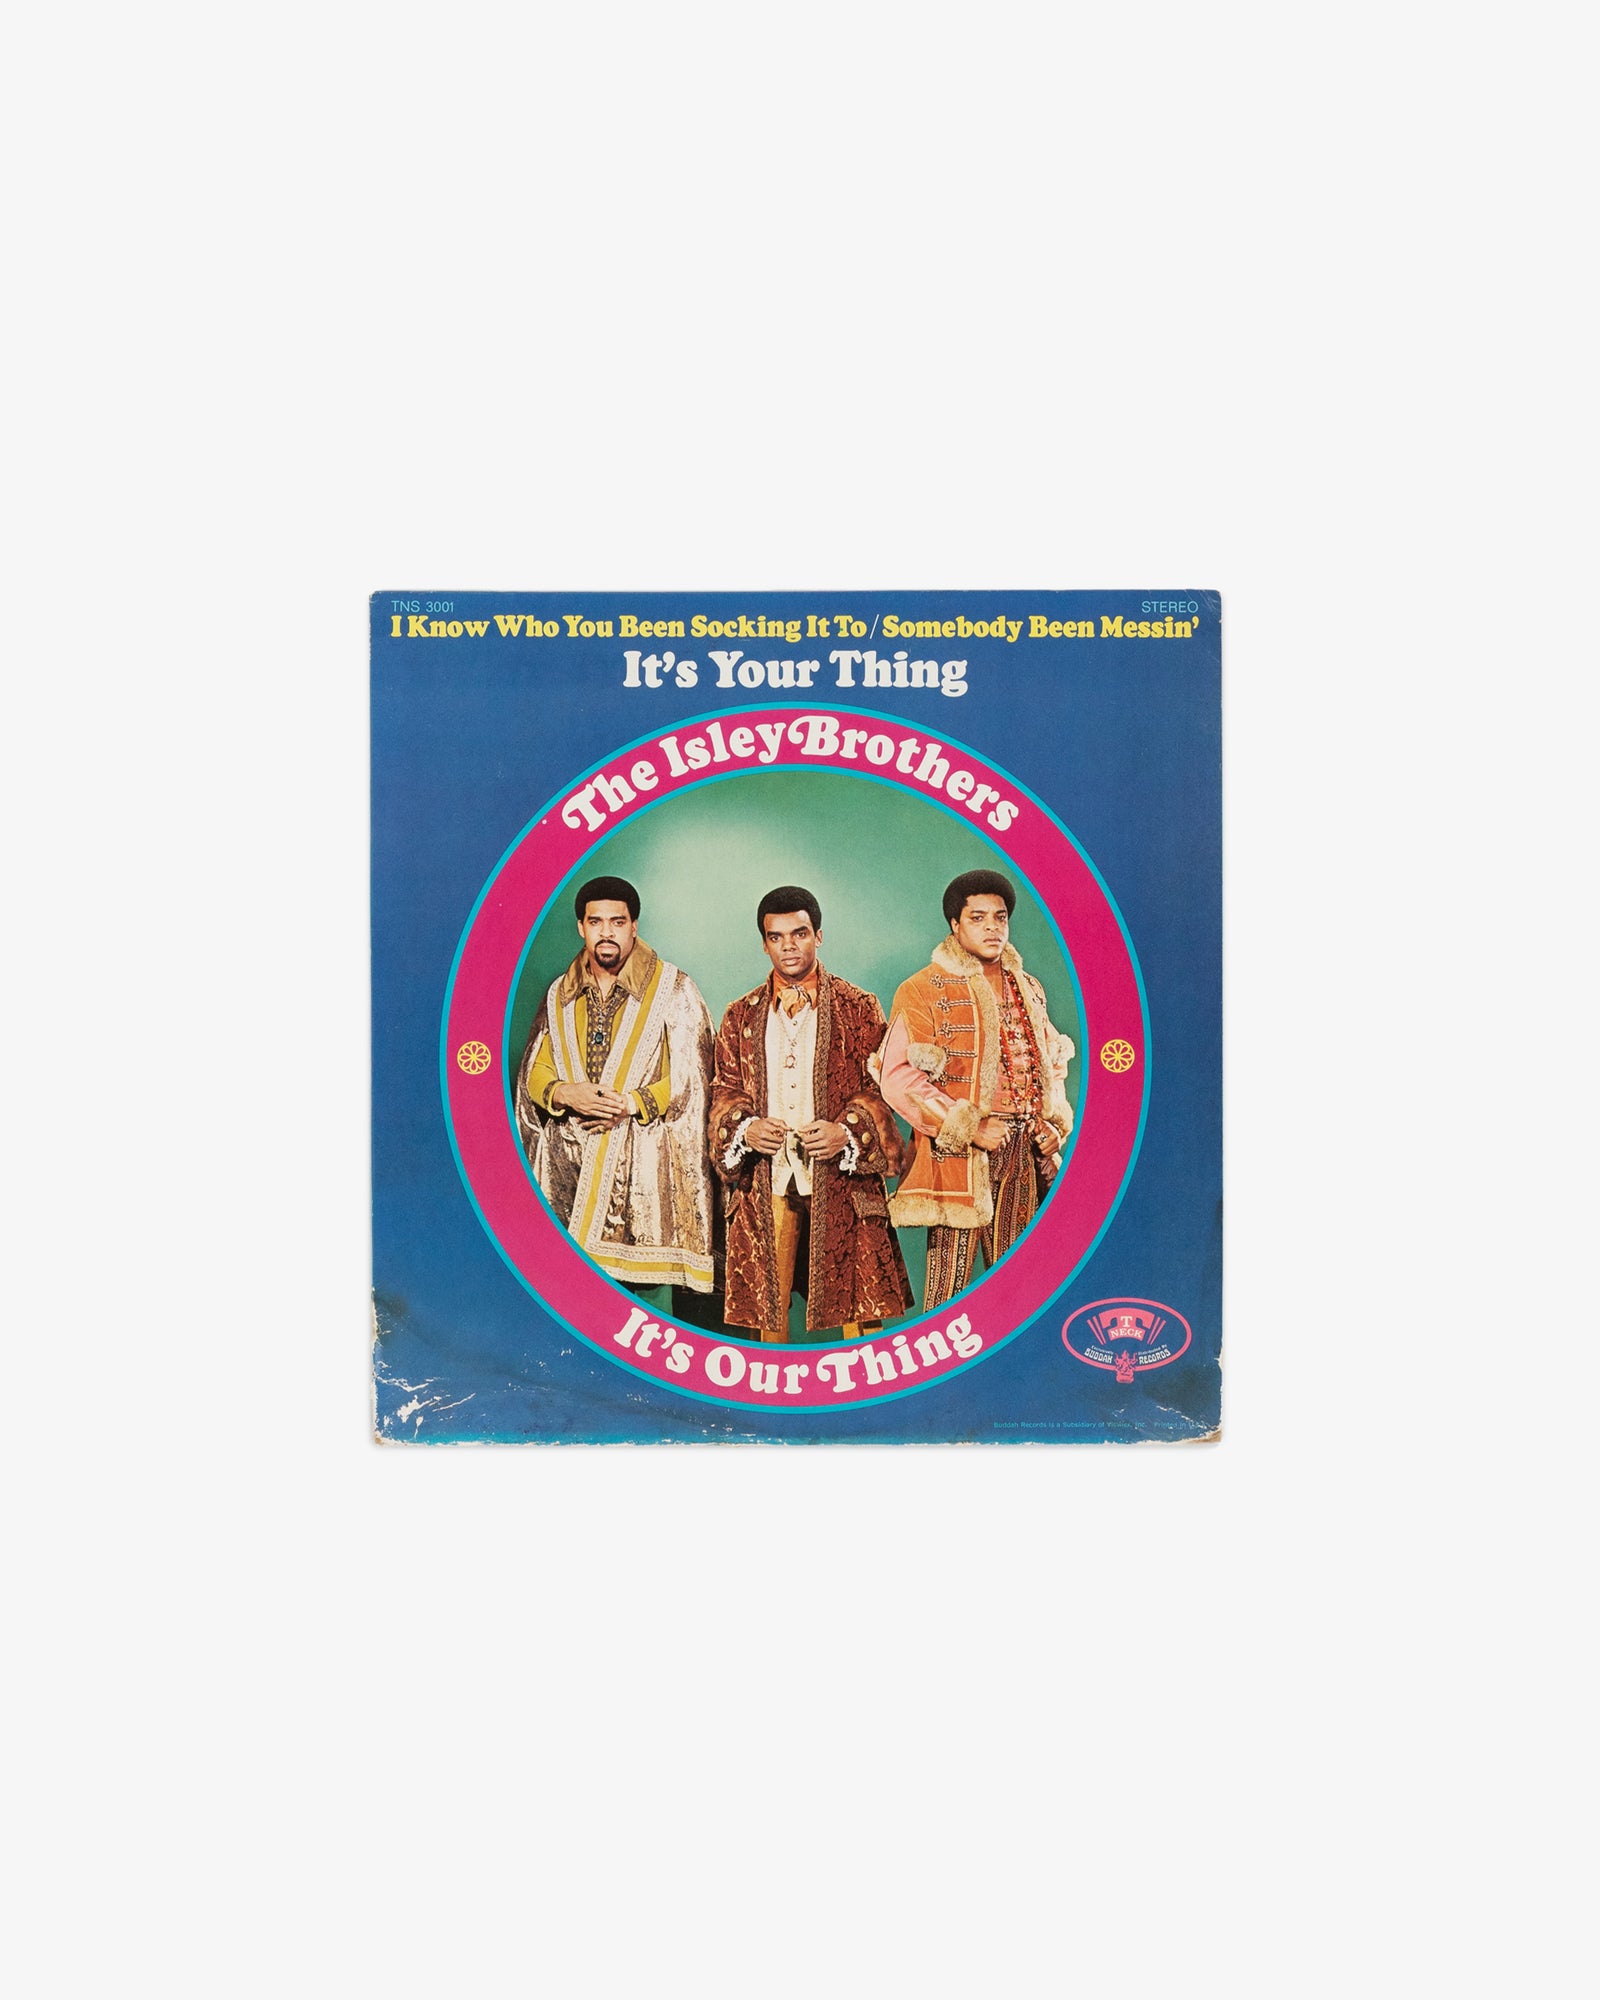 The Isley Brothers – It's Our Thing LP